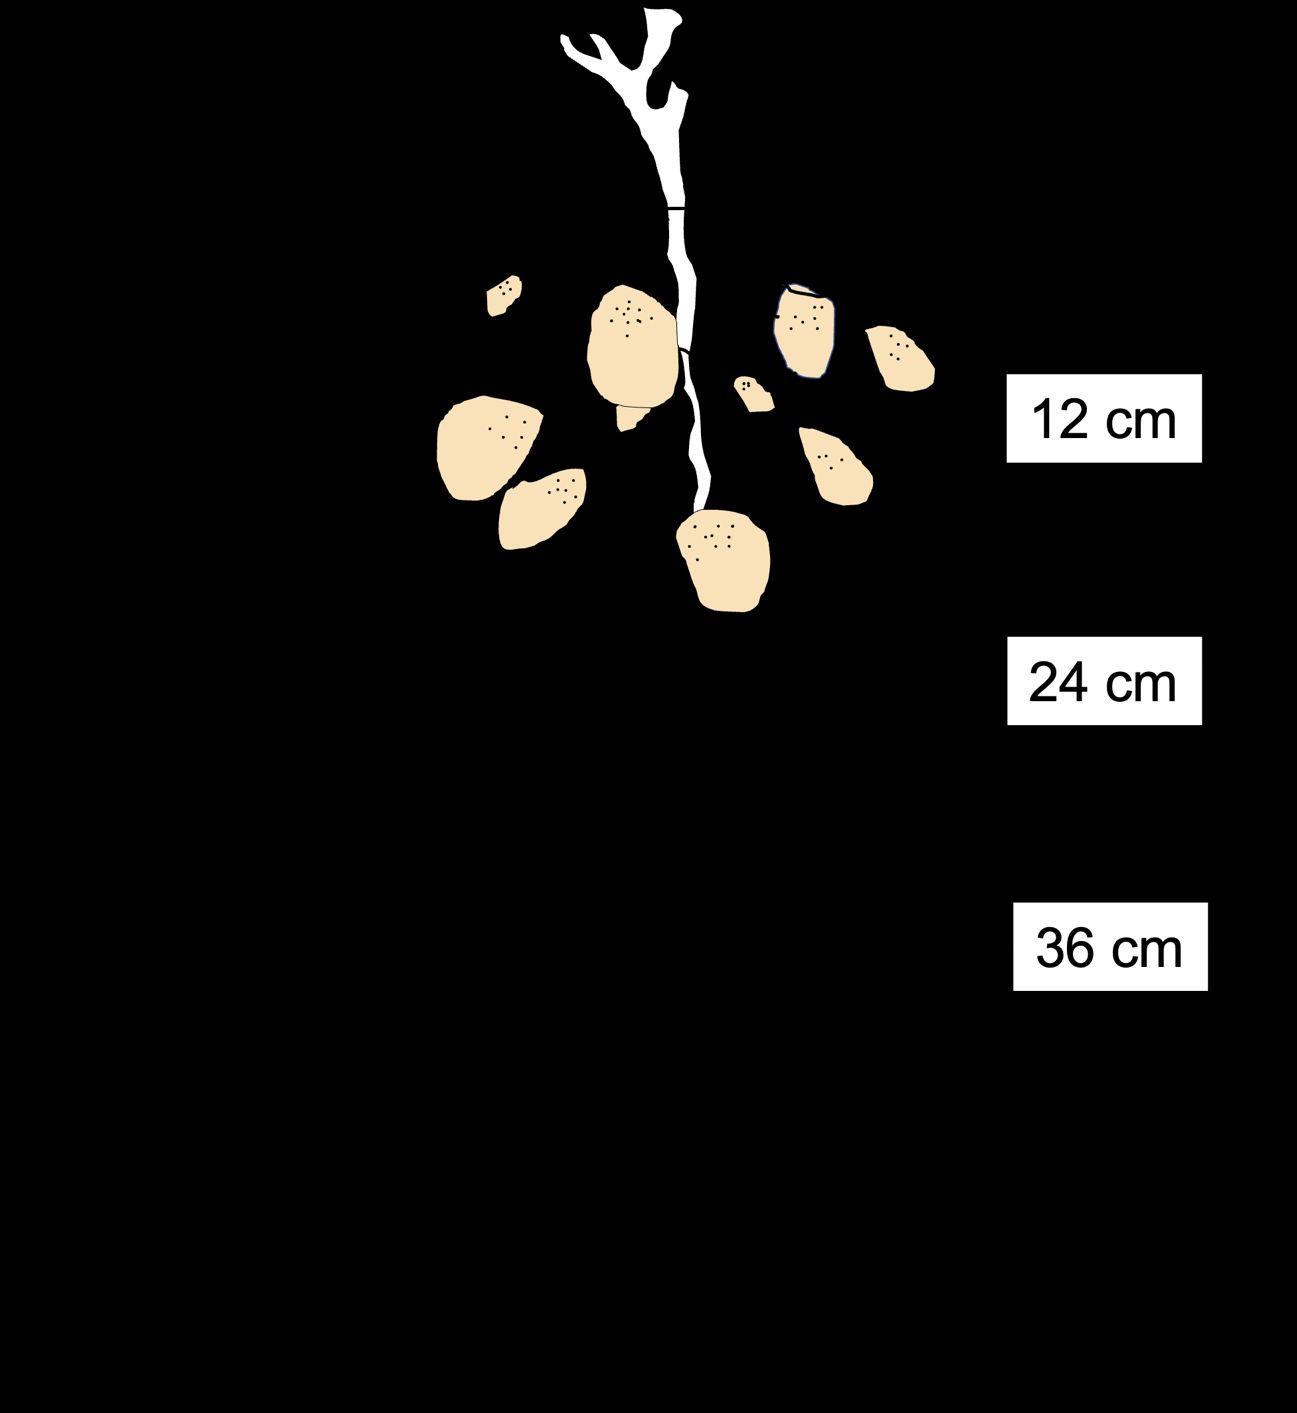 The total root length of a potato plant at different soil depths.